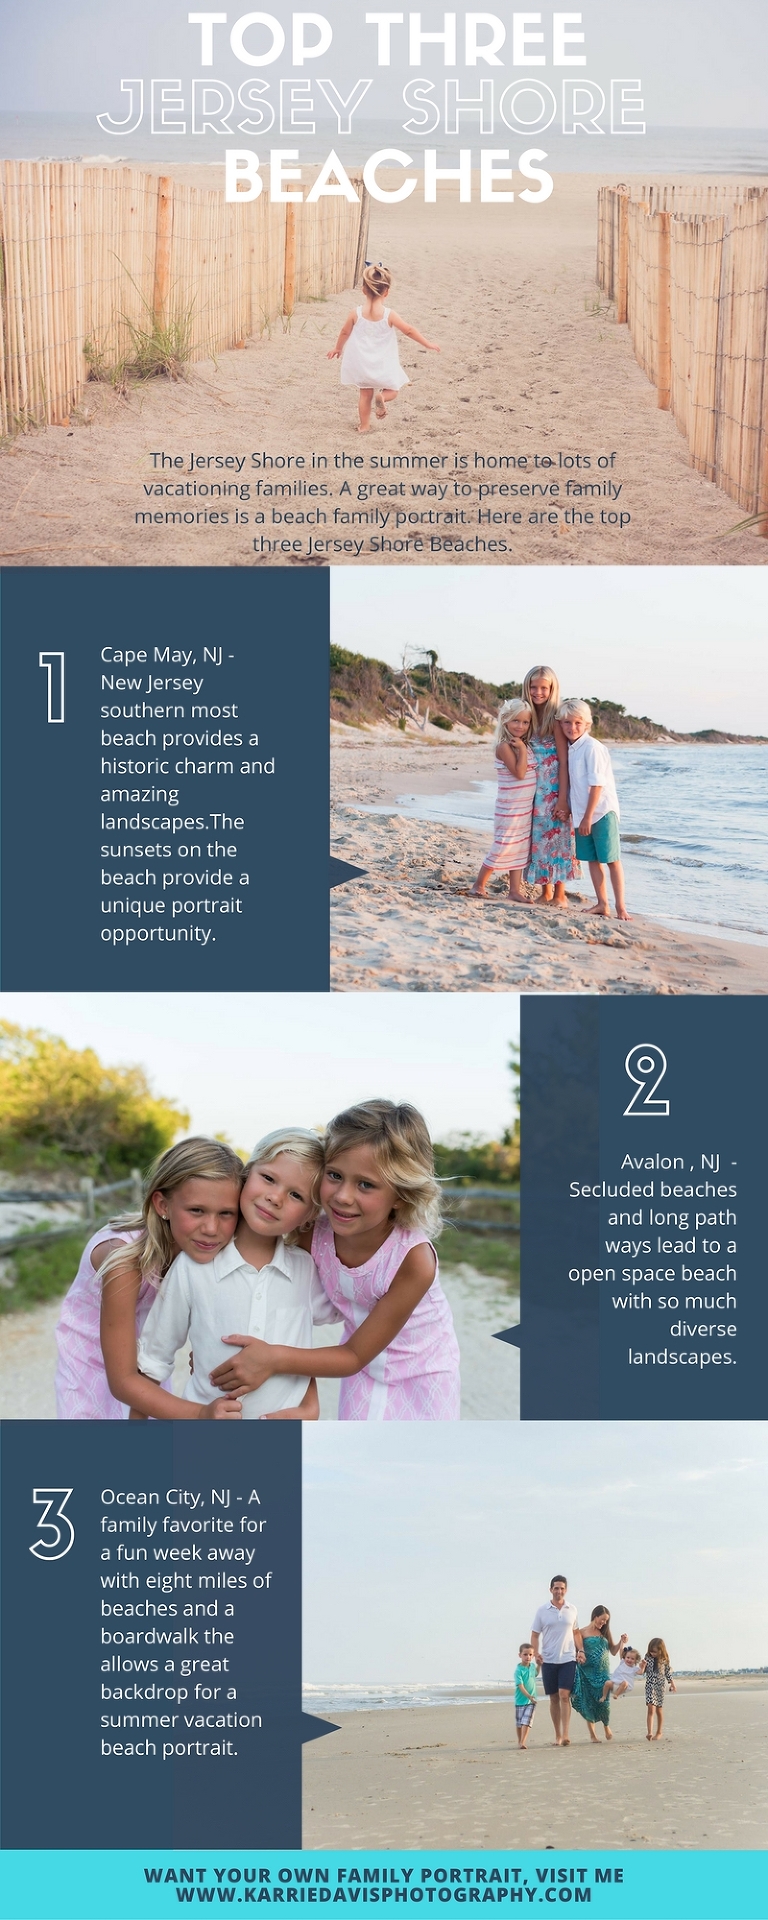 Best Beaches at the Jersey Shore for Family Portraits. NJ is a great place for family memories and photos.